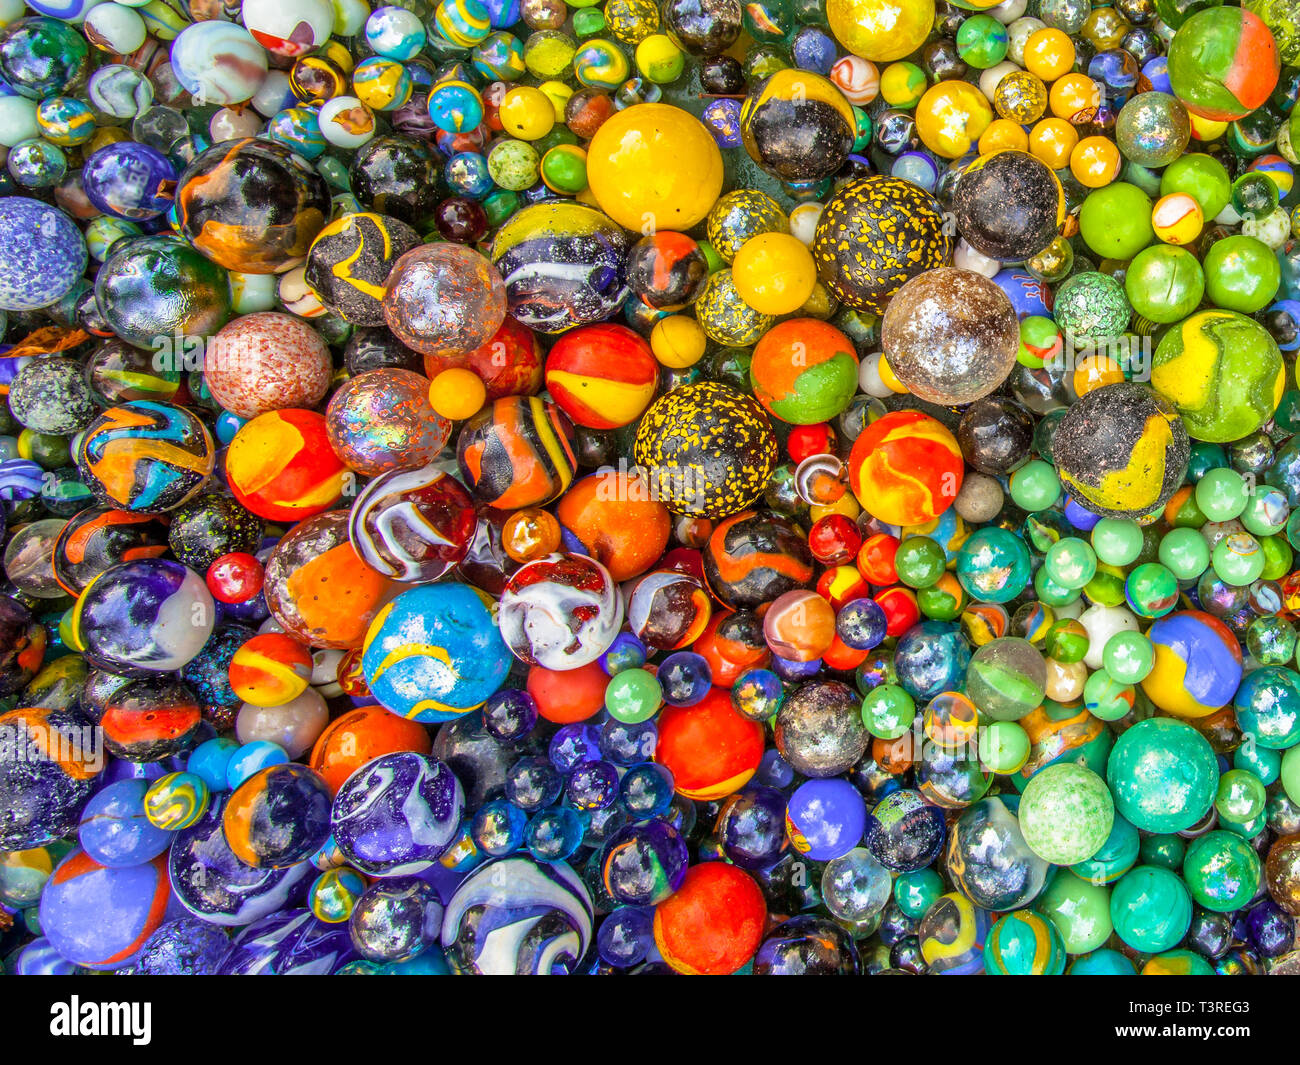 Glass marbles of different sizes in a color pattern as methaphor for multicultural community coexistence Stock Photo